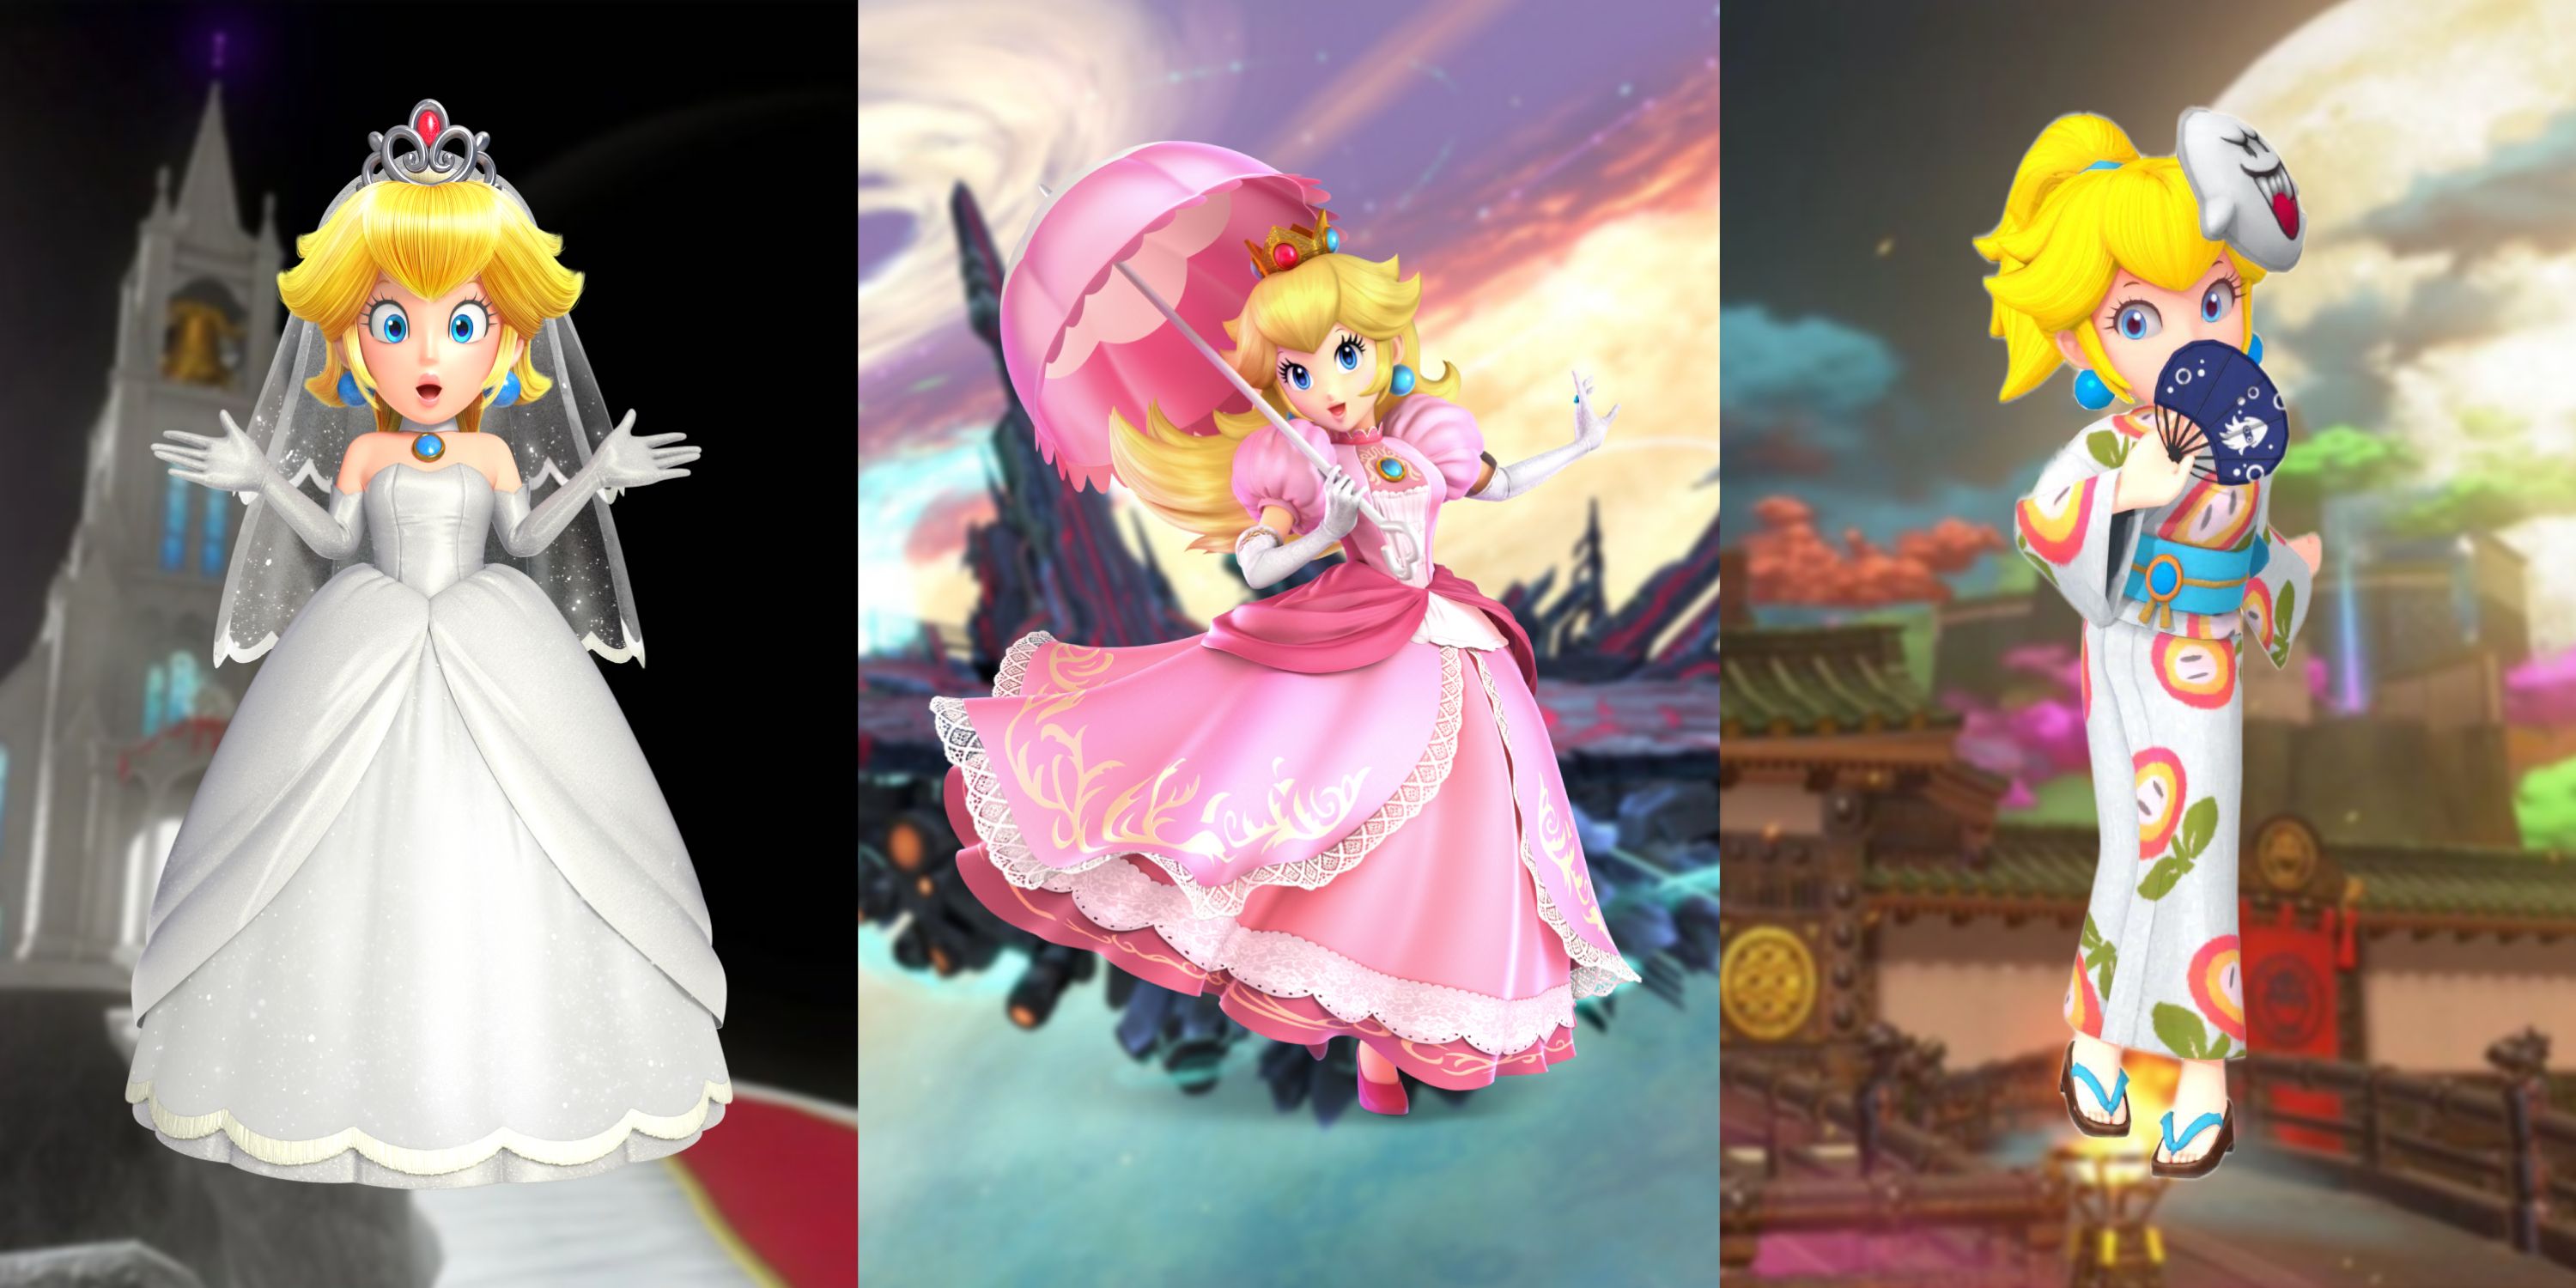 Peach in her wedding dress from Super Mario Odyssey, Peach in her pink dress from Super Smash Bros, and Peach in her Fire Flower yukata from Super Mario Odyssey